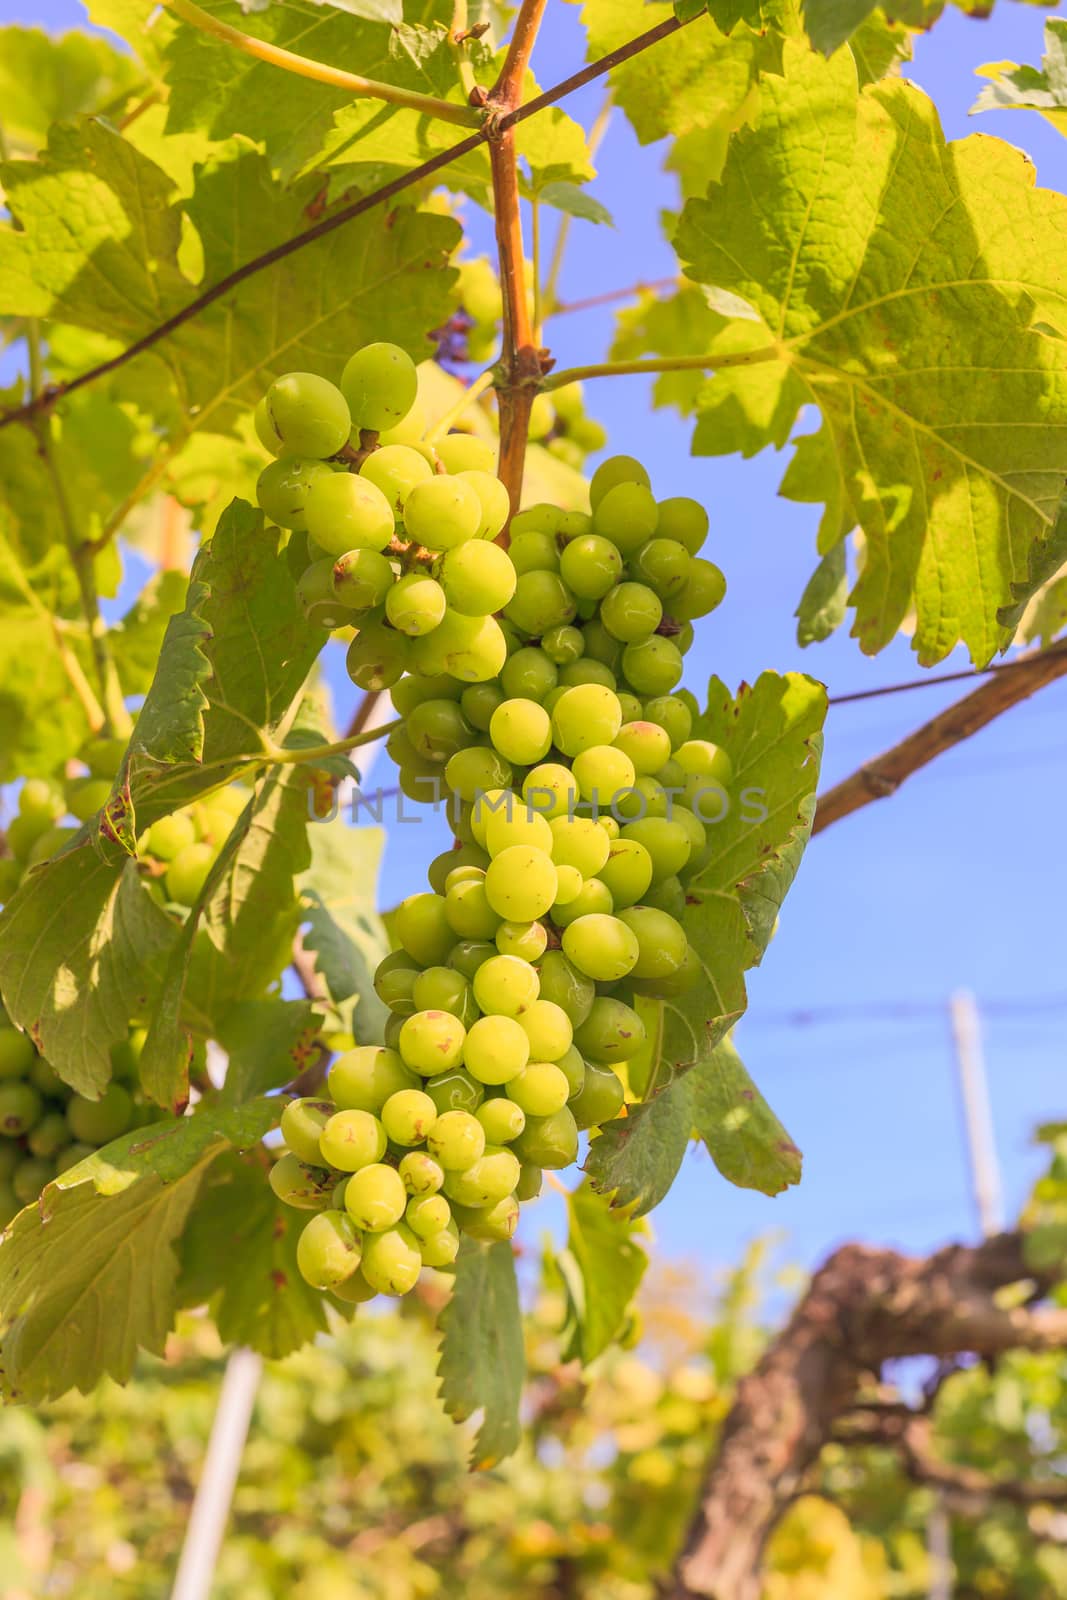 bunch of grapes on with green leaves